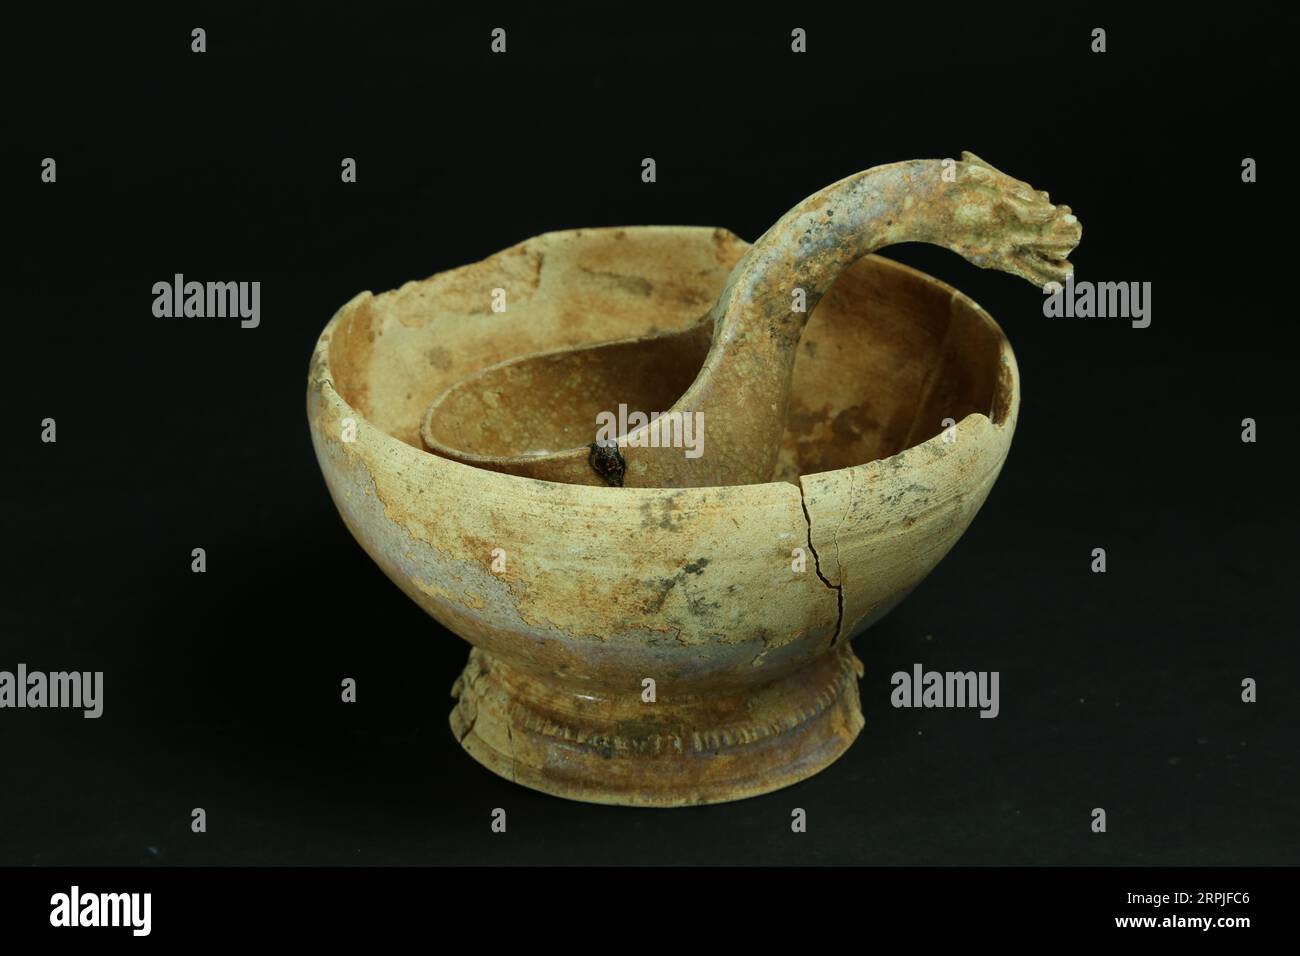 191208 -- NANCHANG, Dec. 8, 2019 -- Photo taken on Sept. 6, 2019 shows a relic unearthed from the ancient tombs excavated in Ganjiang New District, Nanchang, east China s Jiangxi Province. Archaeologists have excavated 73 ancient tombs dating back 1,400 years ago in east China s Jiangxi Province, the local institute of cultural relics and archeology said Saturday. It is believed that the majority of the discovered tombs were built in the Six Dynasties 222-589. The 8,000-square-meter site was discovered in June 2013. Excavation started in August 2018. CHINA-JIANGXI-ANCIENT TOMB CLUSTERS-DISCOVE Stock Photo